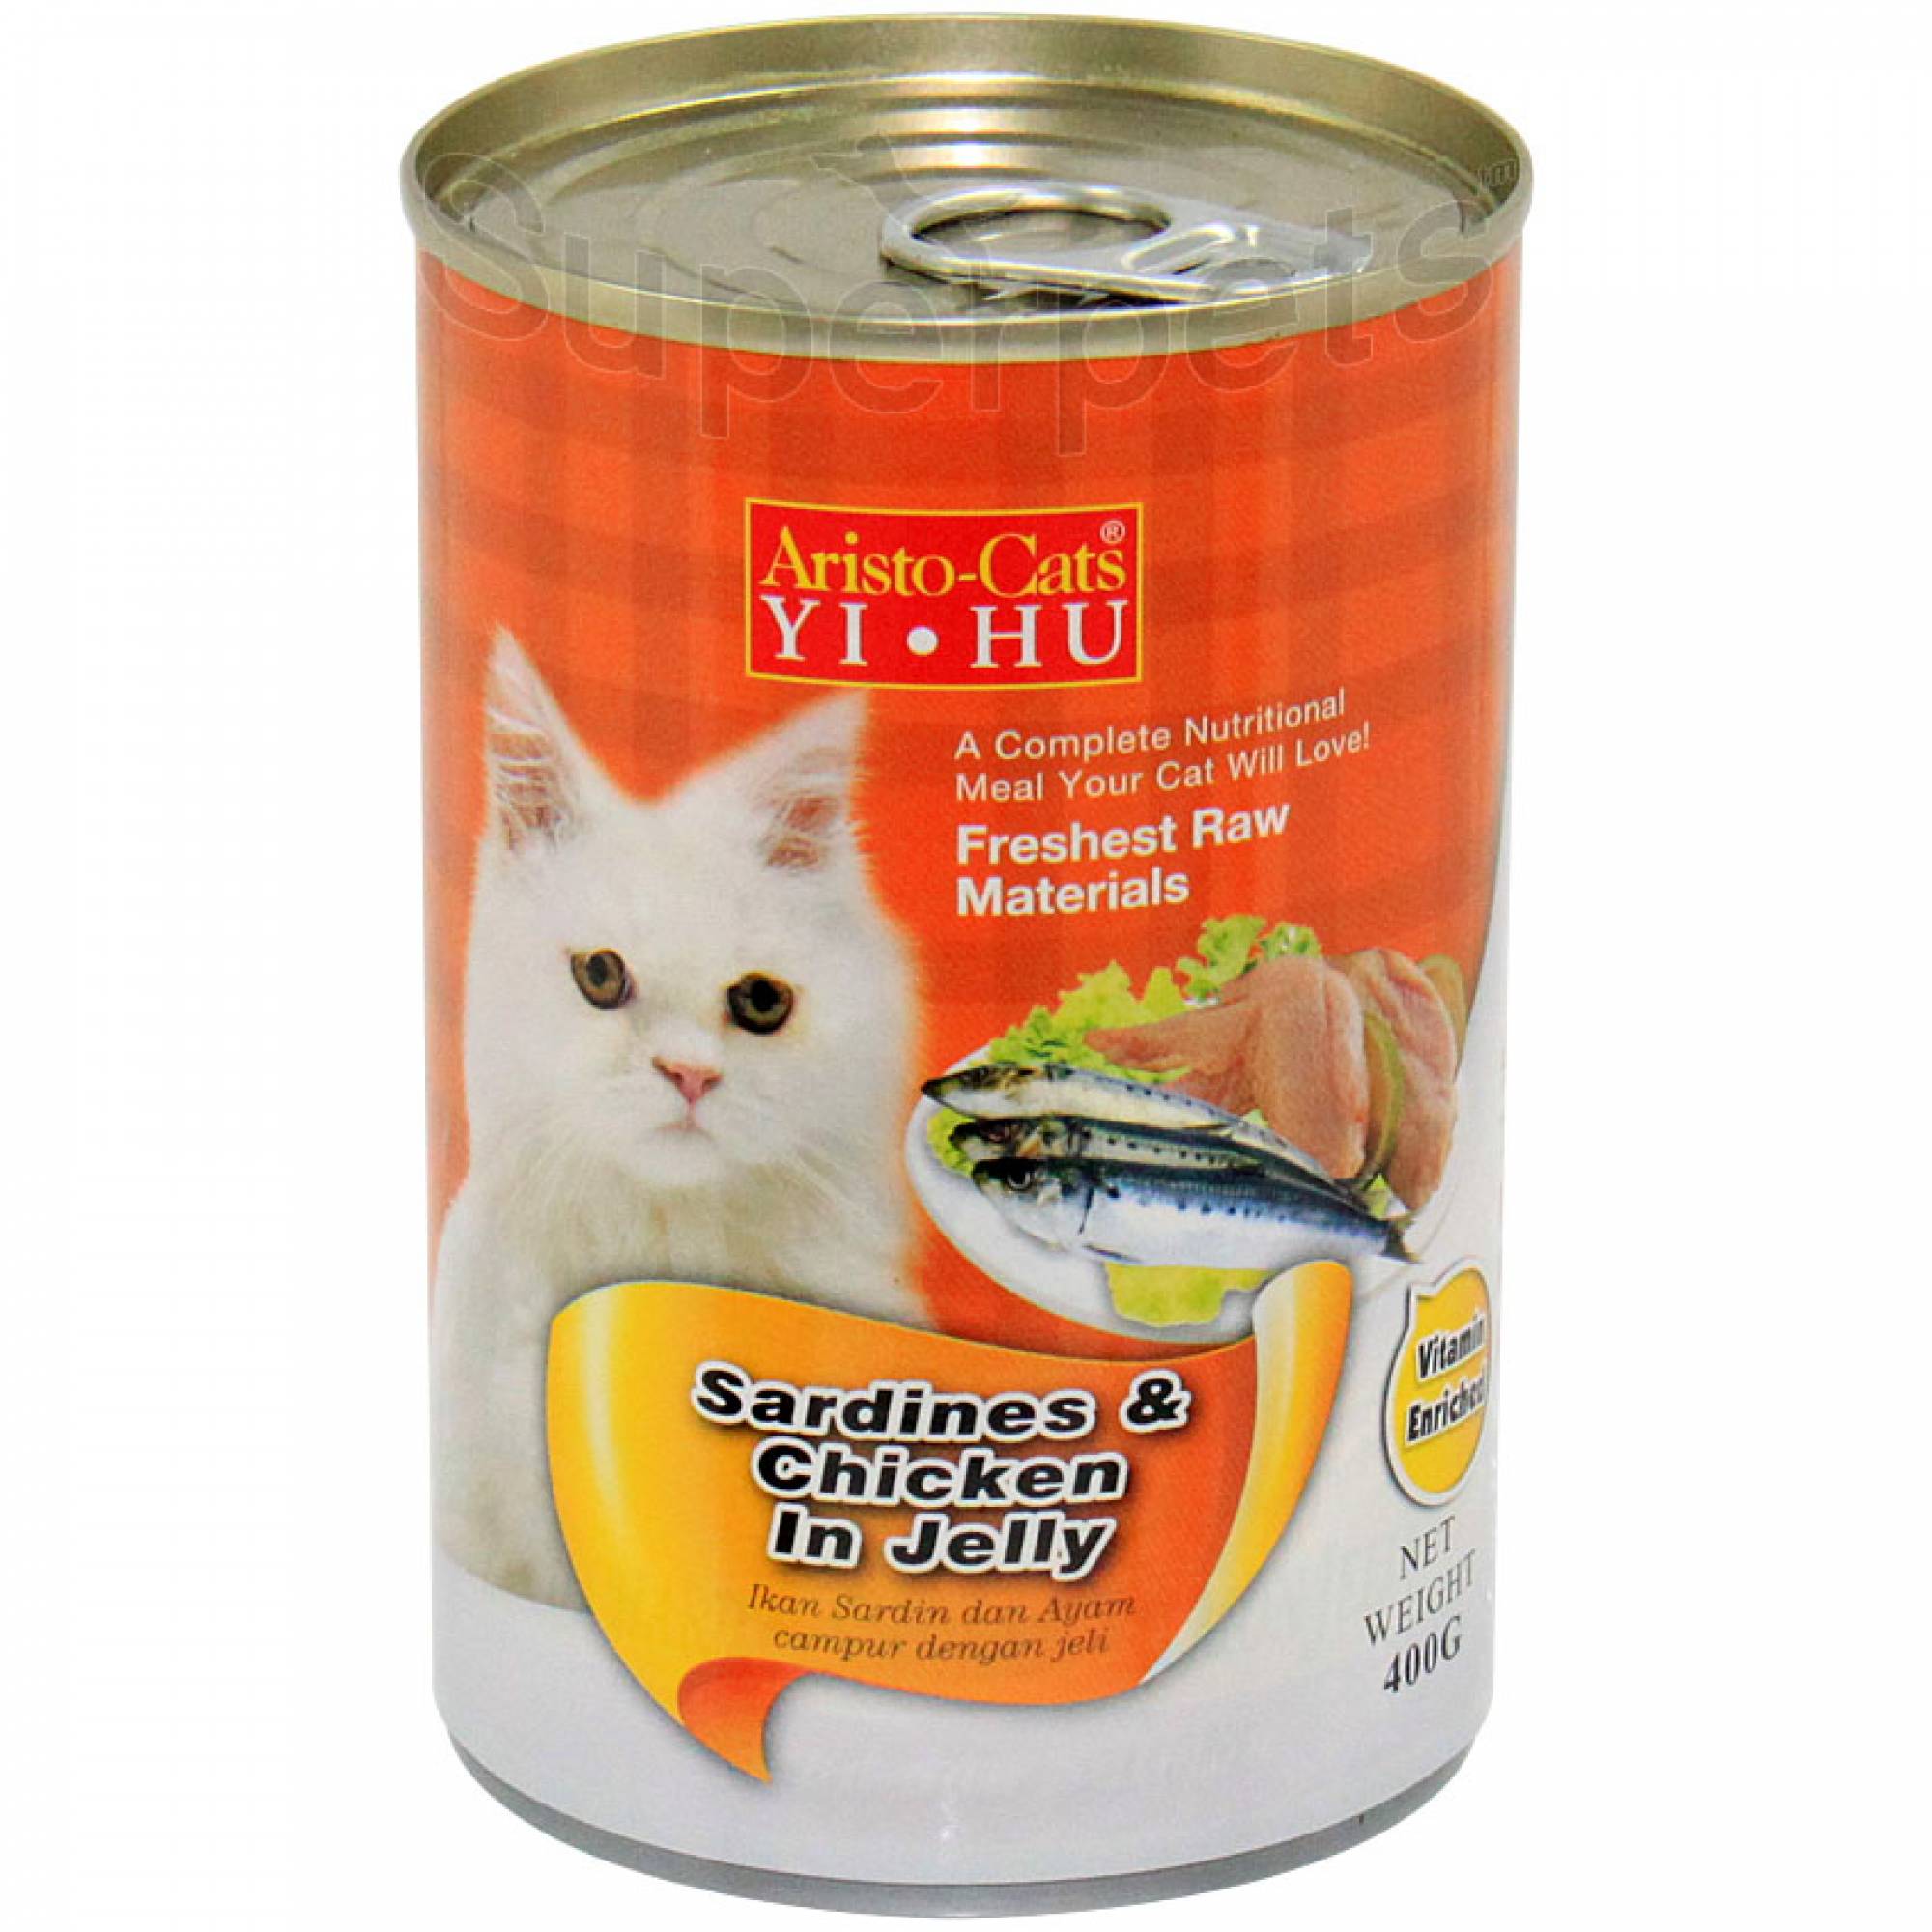 Aristo-Cats - Sardines and Chicken in Jelly 400g x 24pcs (1 carton)